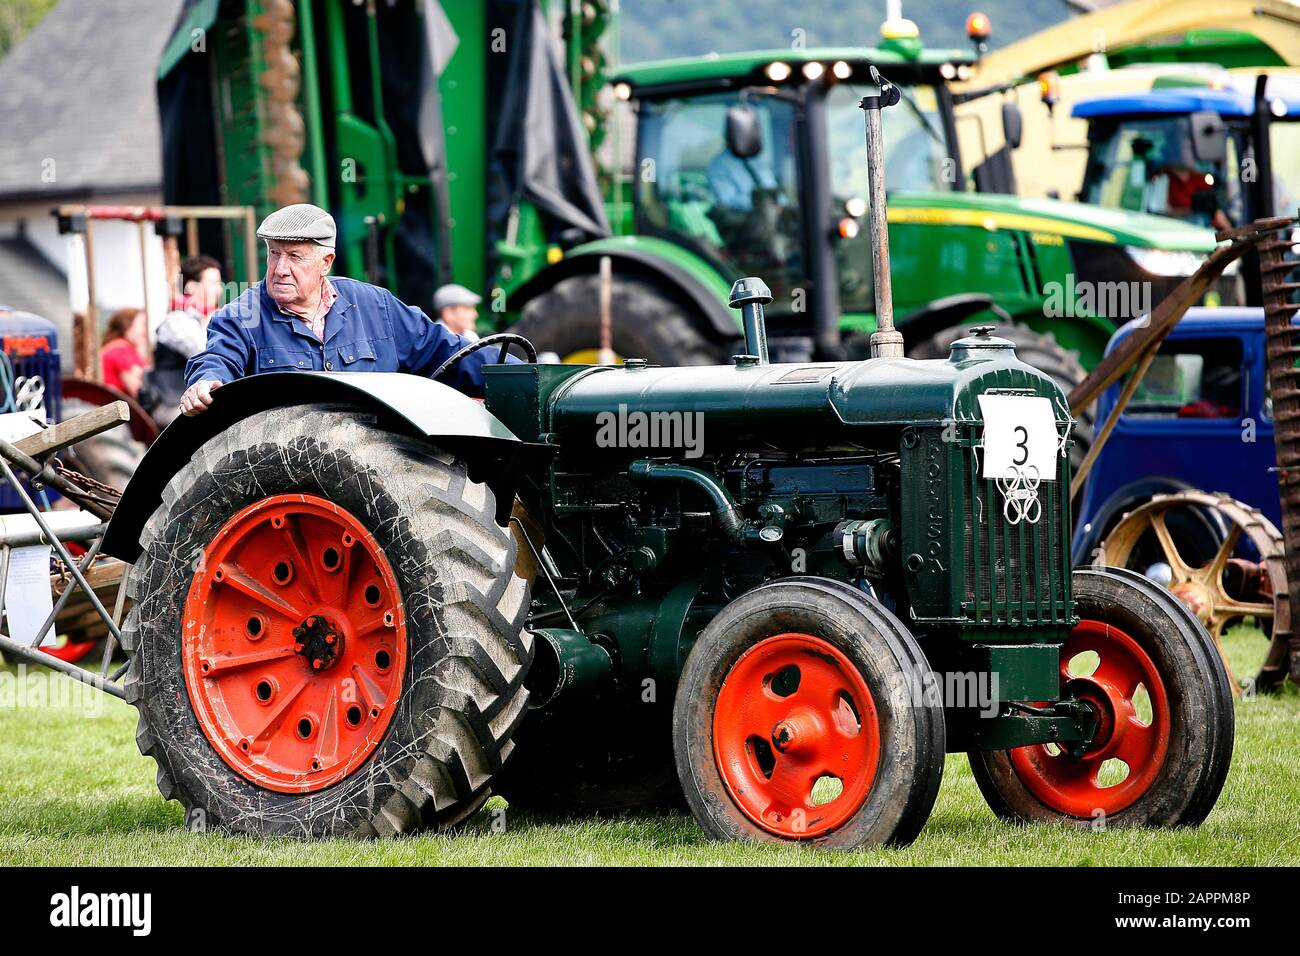 Llanelwedd, Wales, Royal Welsh Show, July 2012. Vintage machinery in the main ring at the Royal Welsh Show ©PRWPhotography Stock Photo